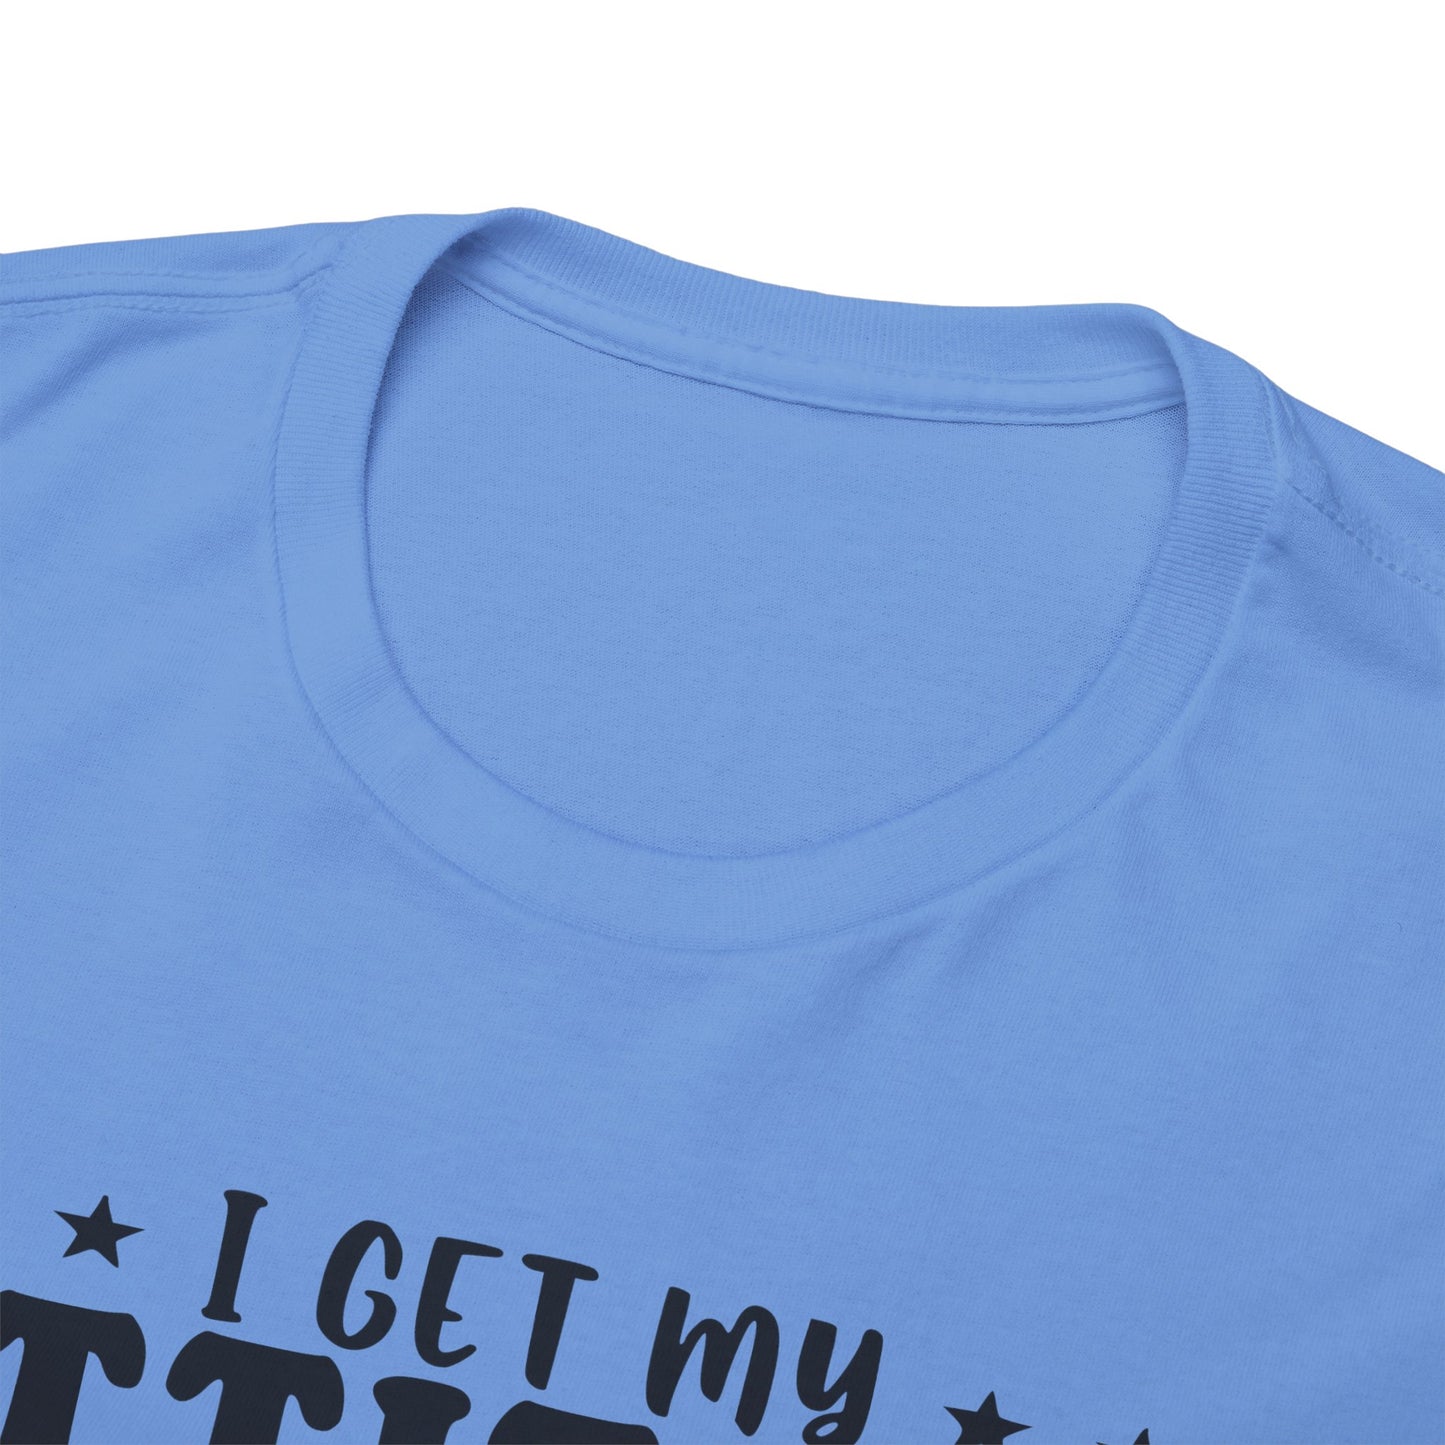 Premium quality cotton tee with "My Frickin Awesome Mom" design, perfect for casual wear.